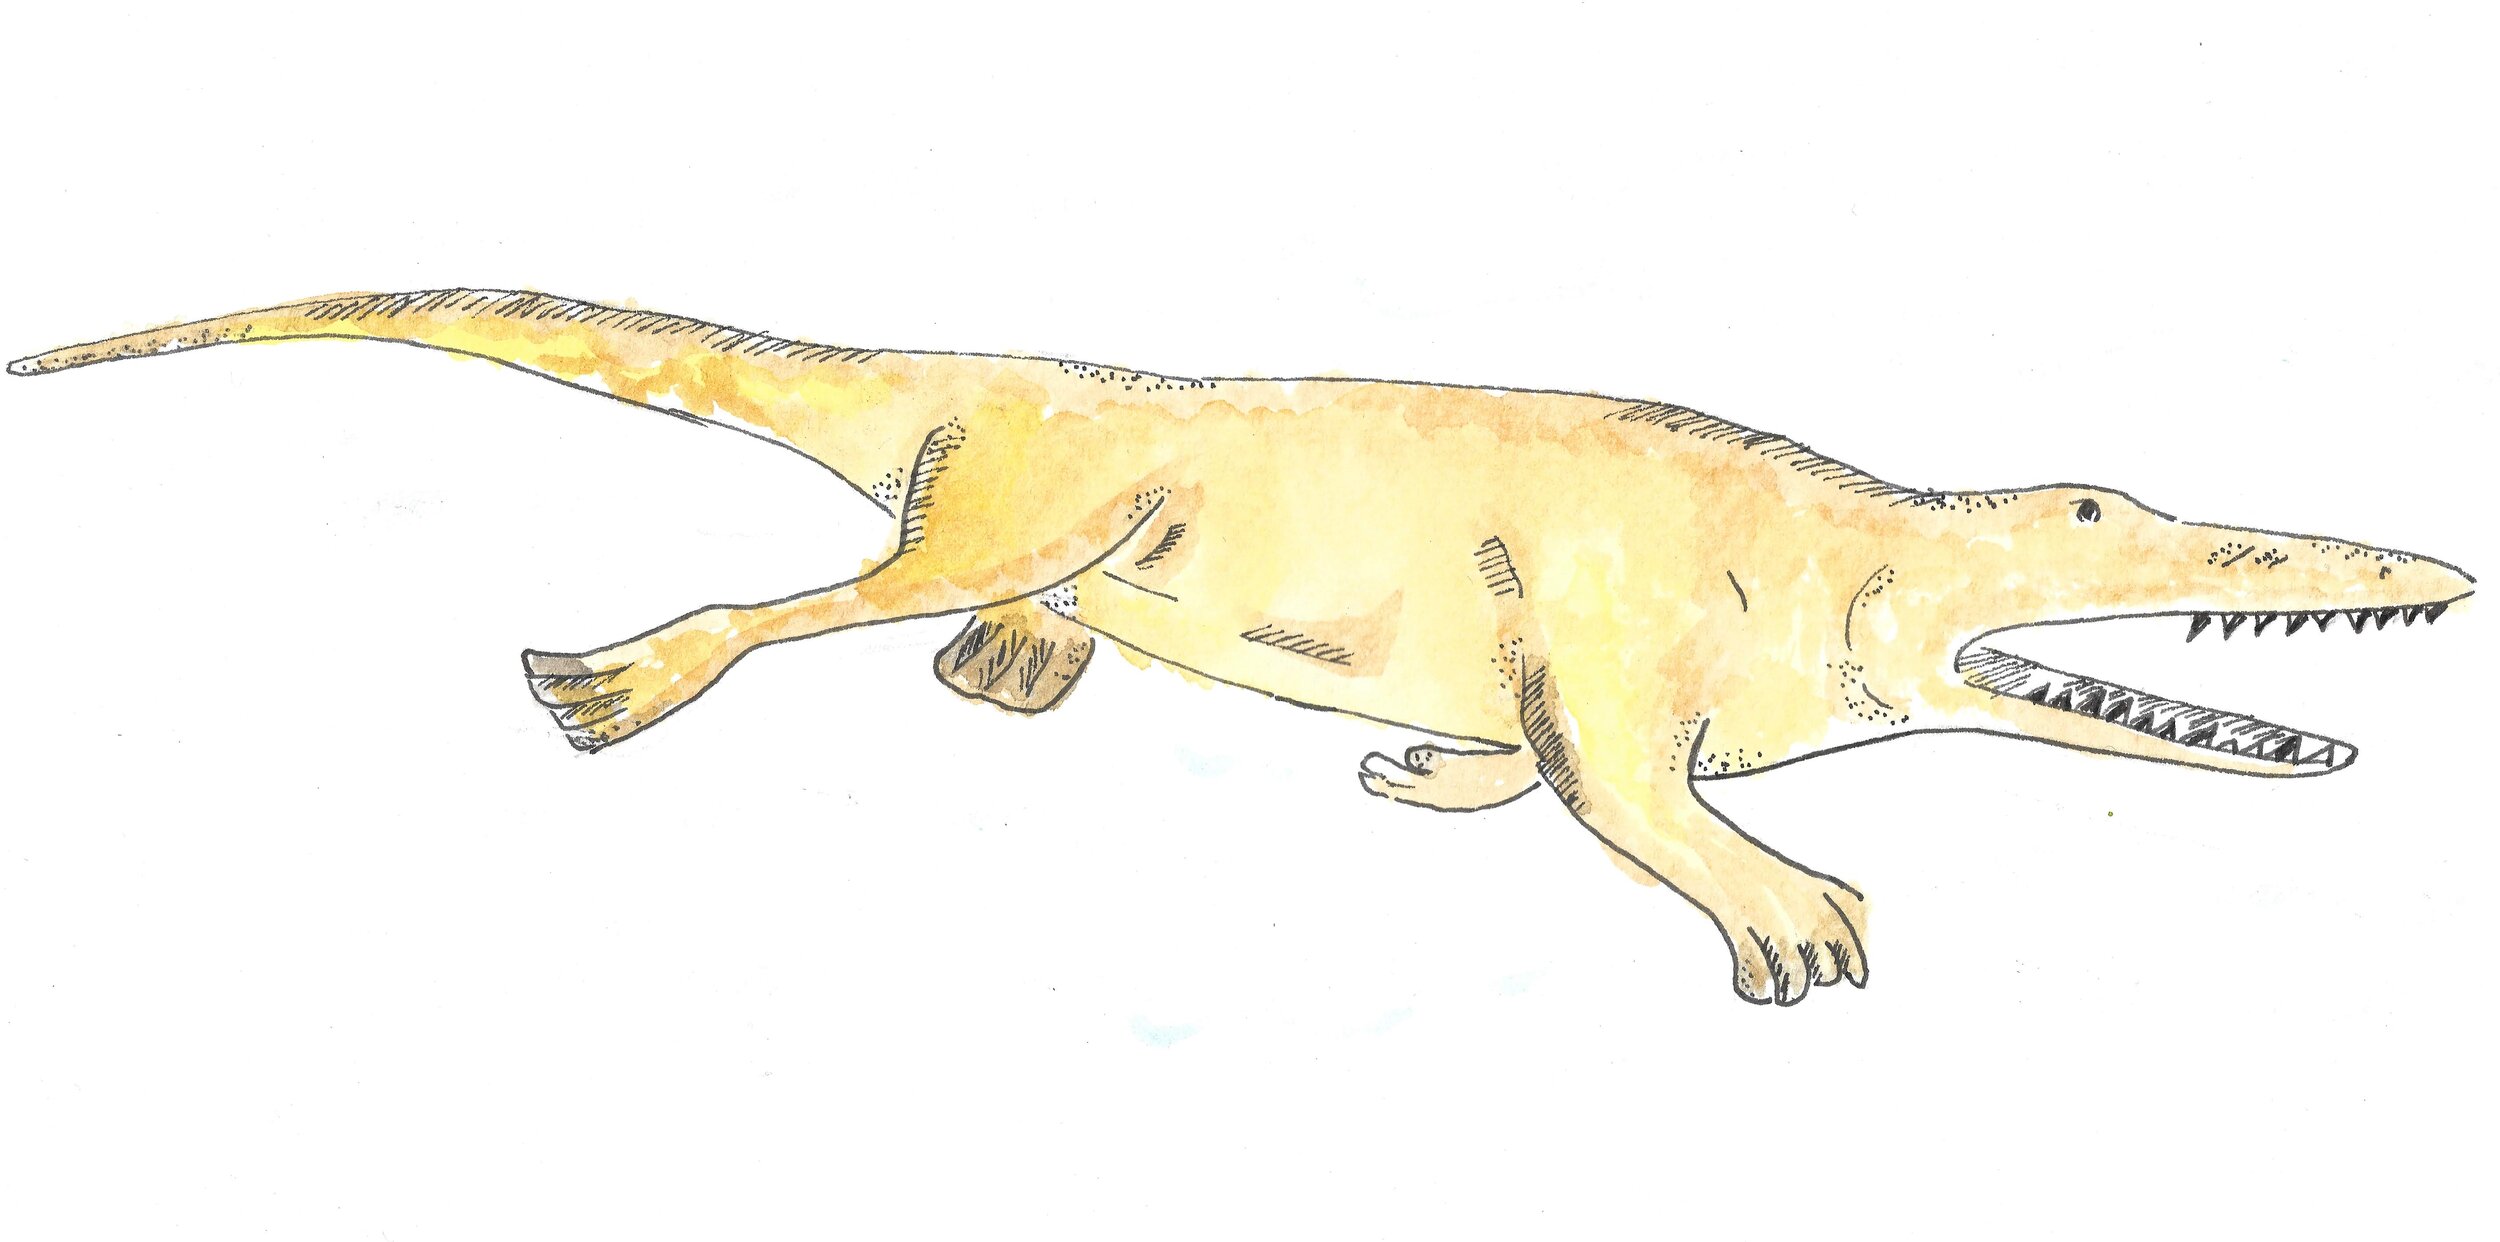 Remingtonocetus was an ancestral whale with a crocodile-like snout and short limbs.